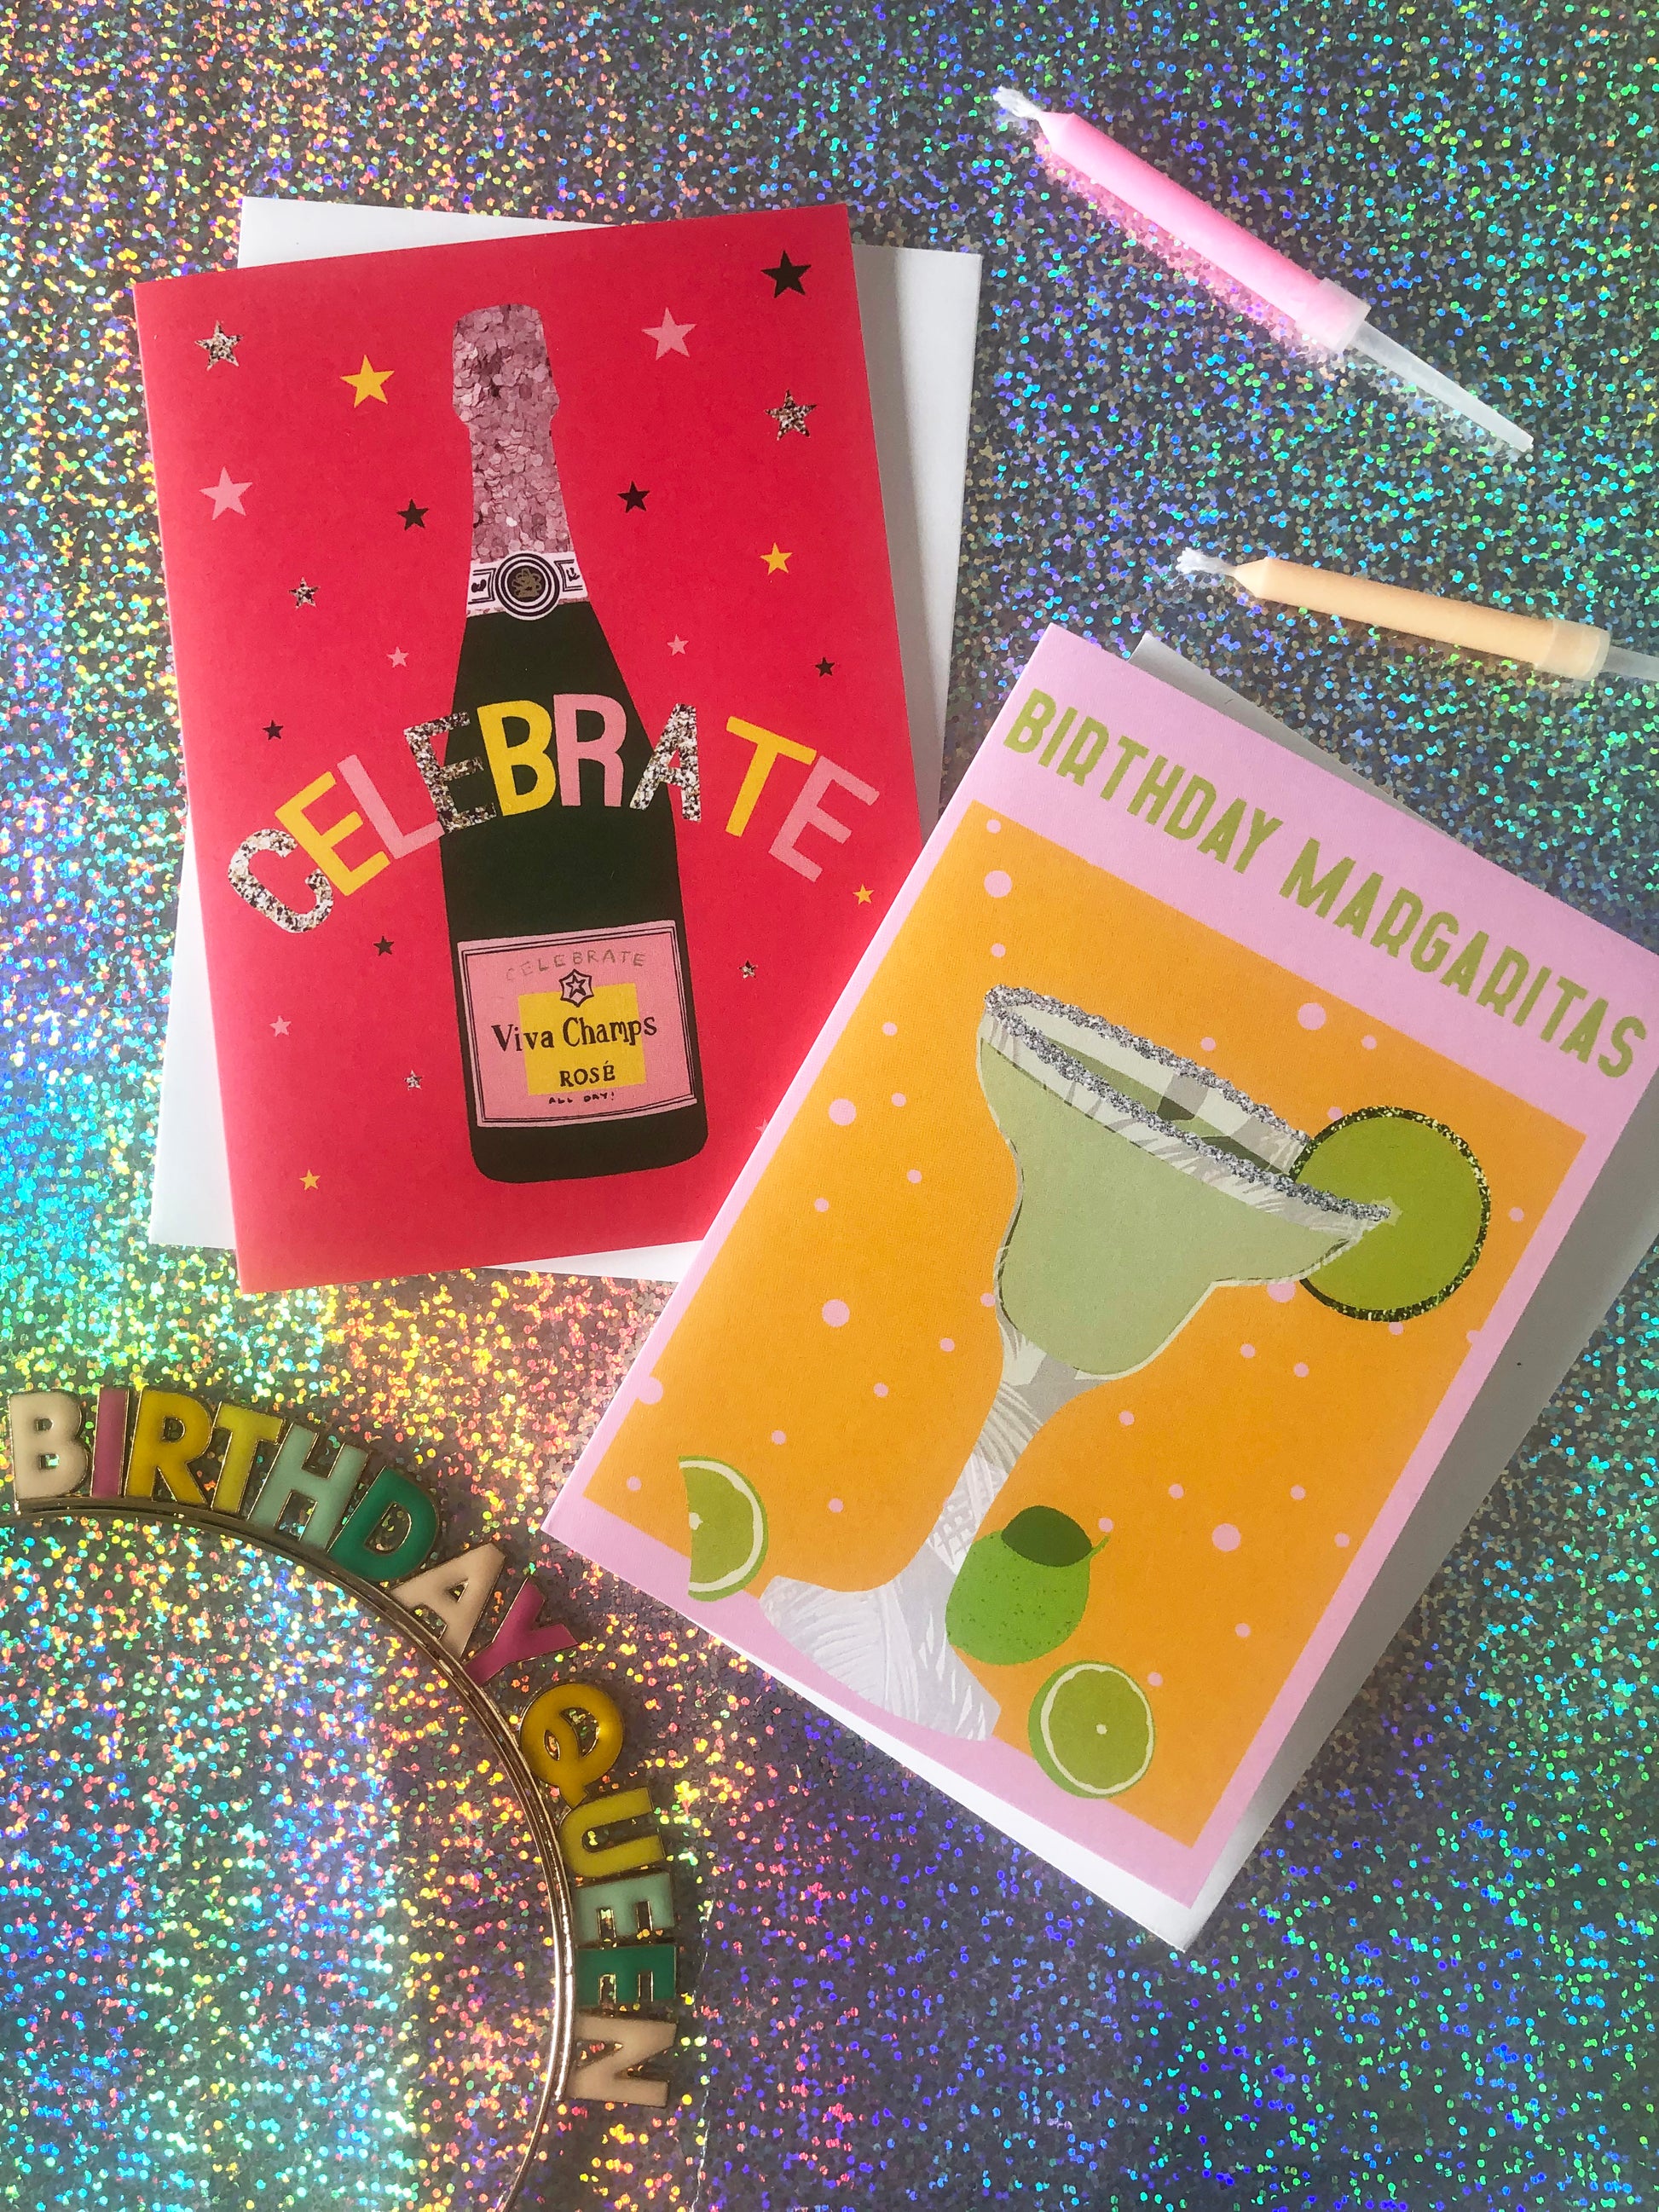 Bright and colourful birthday card featuring a margarita cocktail on a holographic background